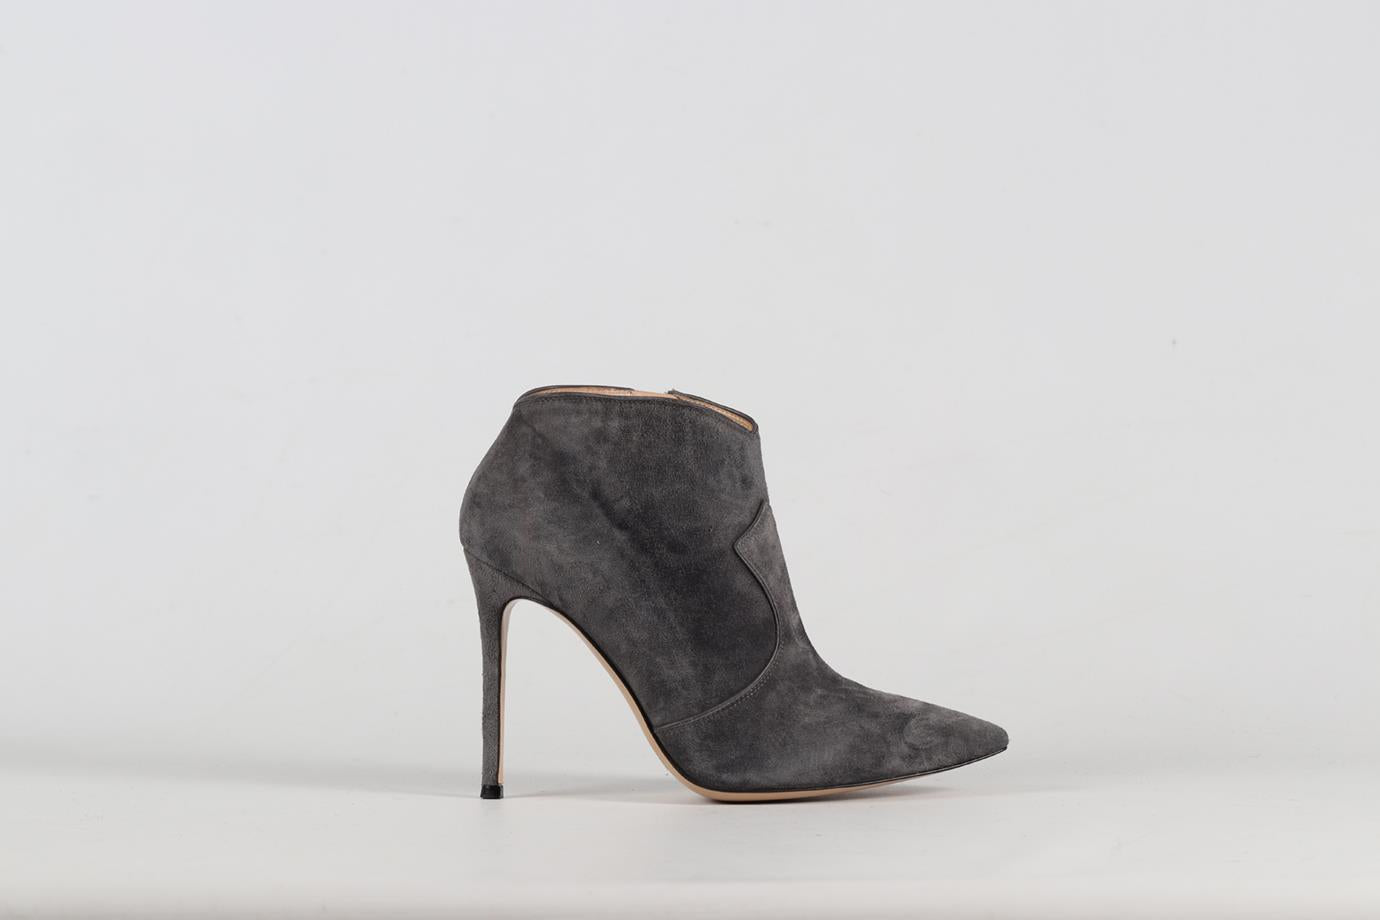 GIANVITO ROSSI SUEDE ANKLE BOOTS EU 38 UK 5 US 8